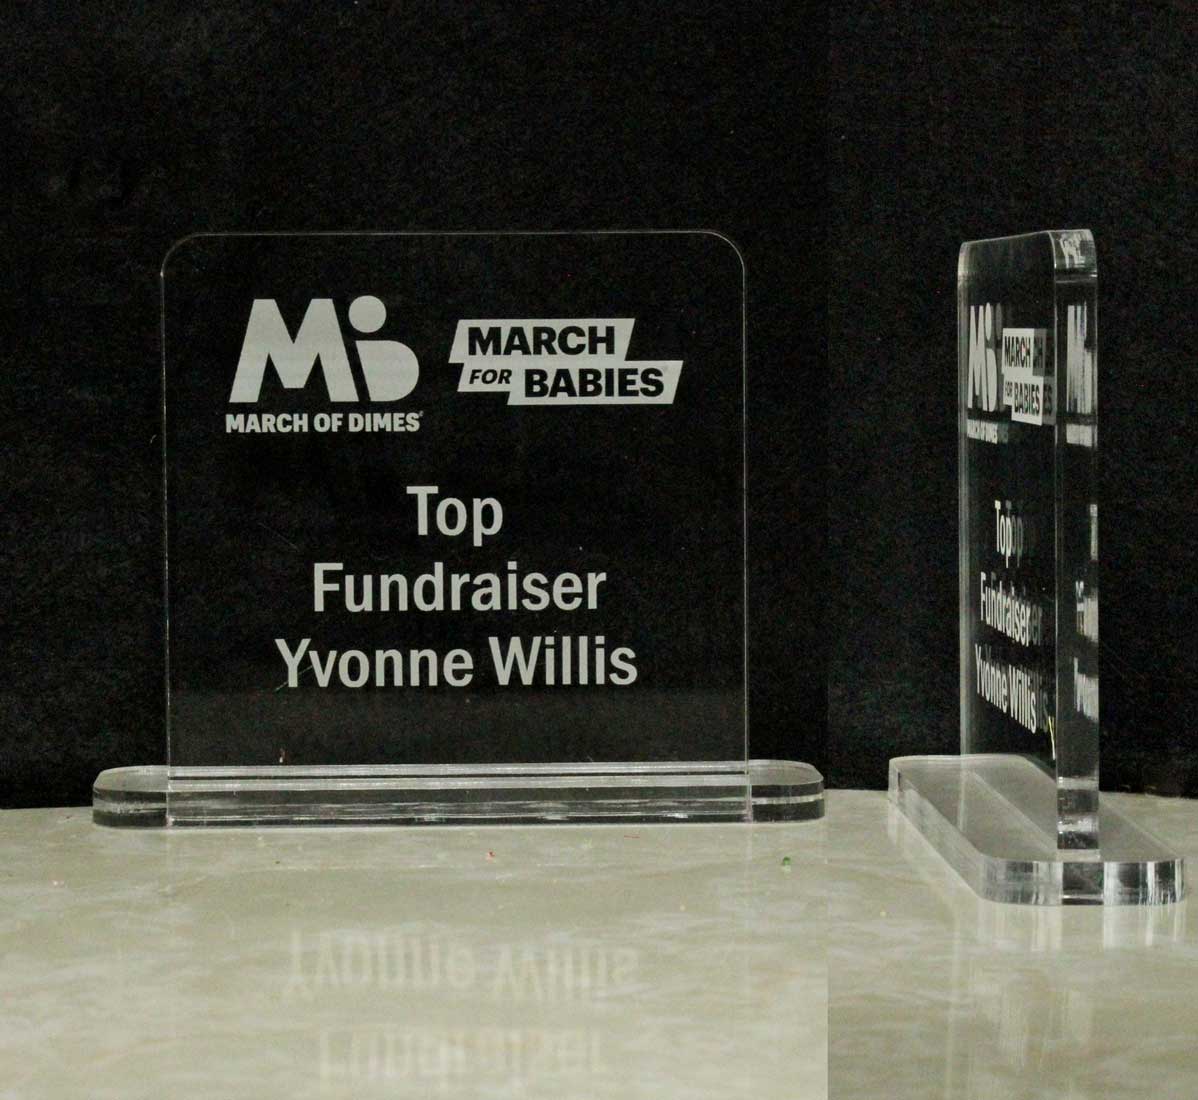 Personalized Acrylic Awards, Plaques